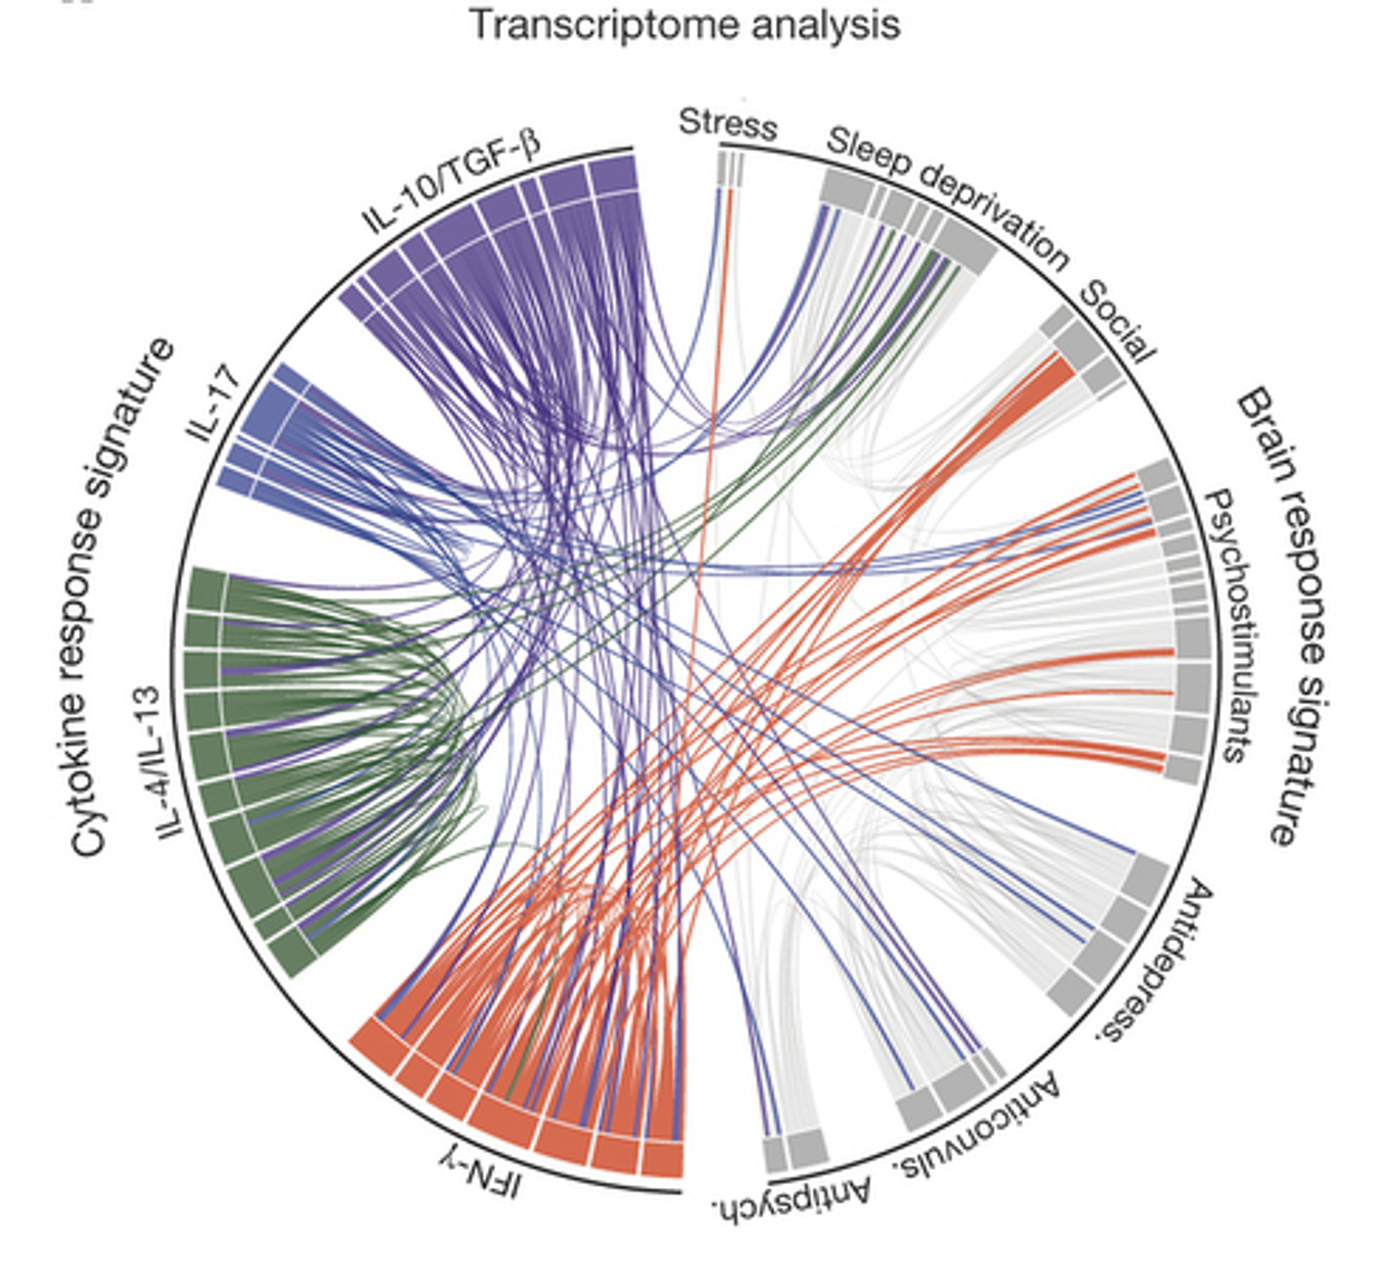 A circos plot generated by the researchers showing the connectivity map derived from the pairwise comparison of transcriptome data sets. / Credit: Nature Filiano et al 